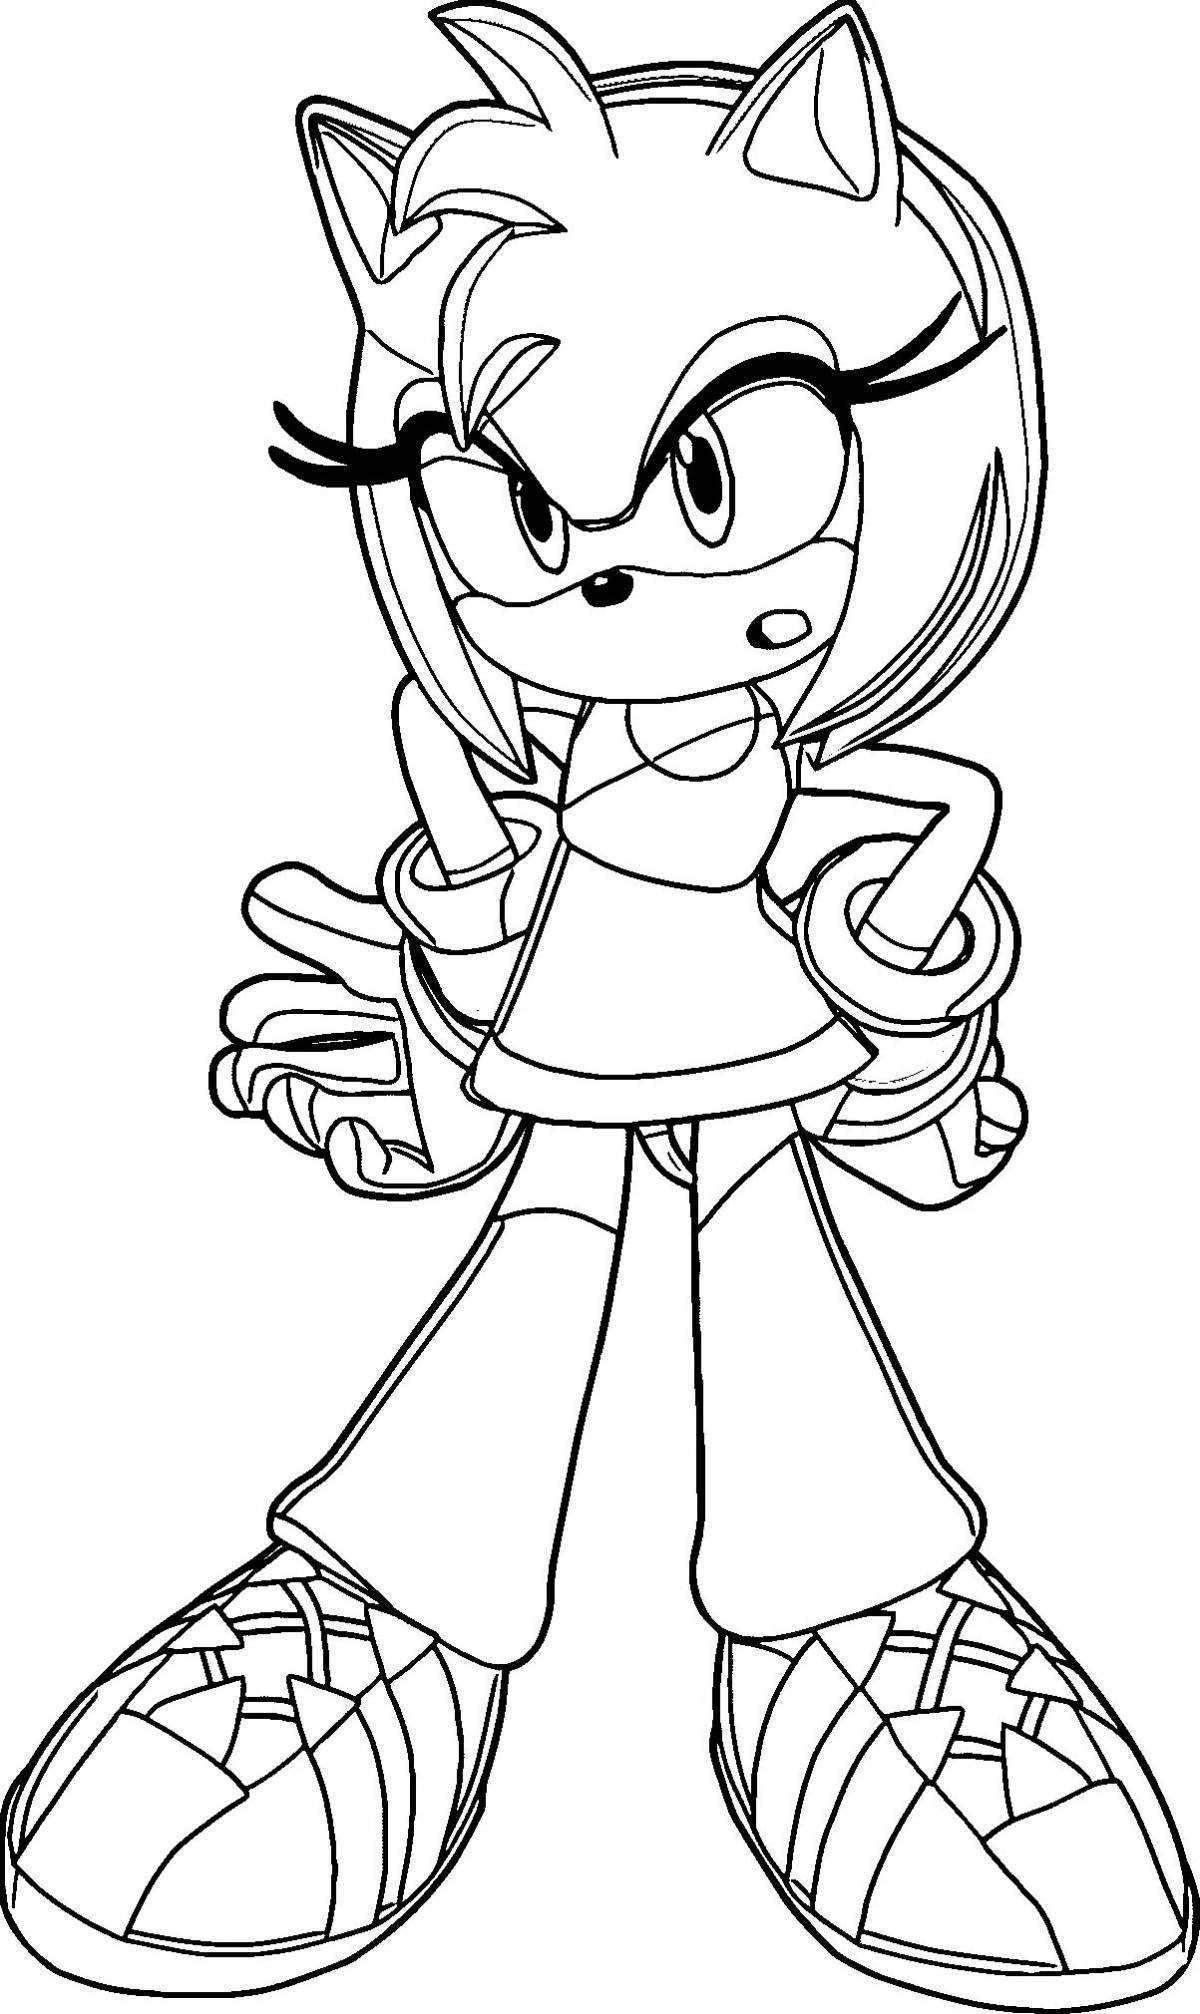 Sonic amy creative coloring book